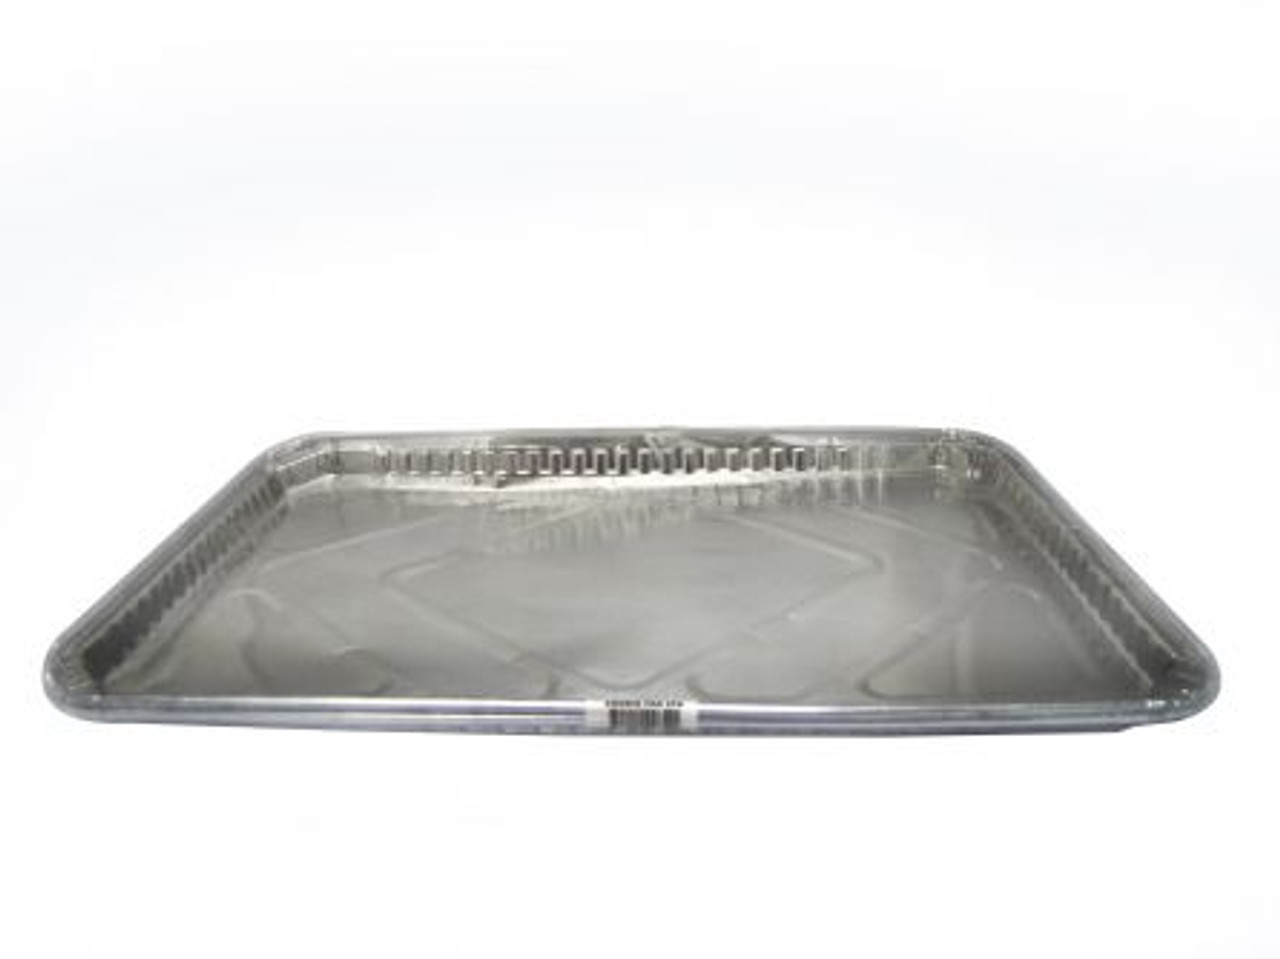 Aluminum Disposable Oven Liners 18x16 100ct.